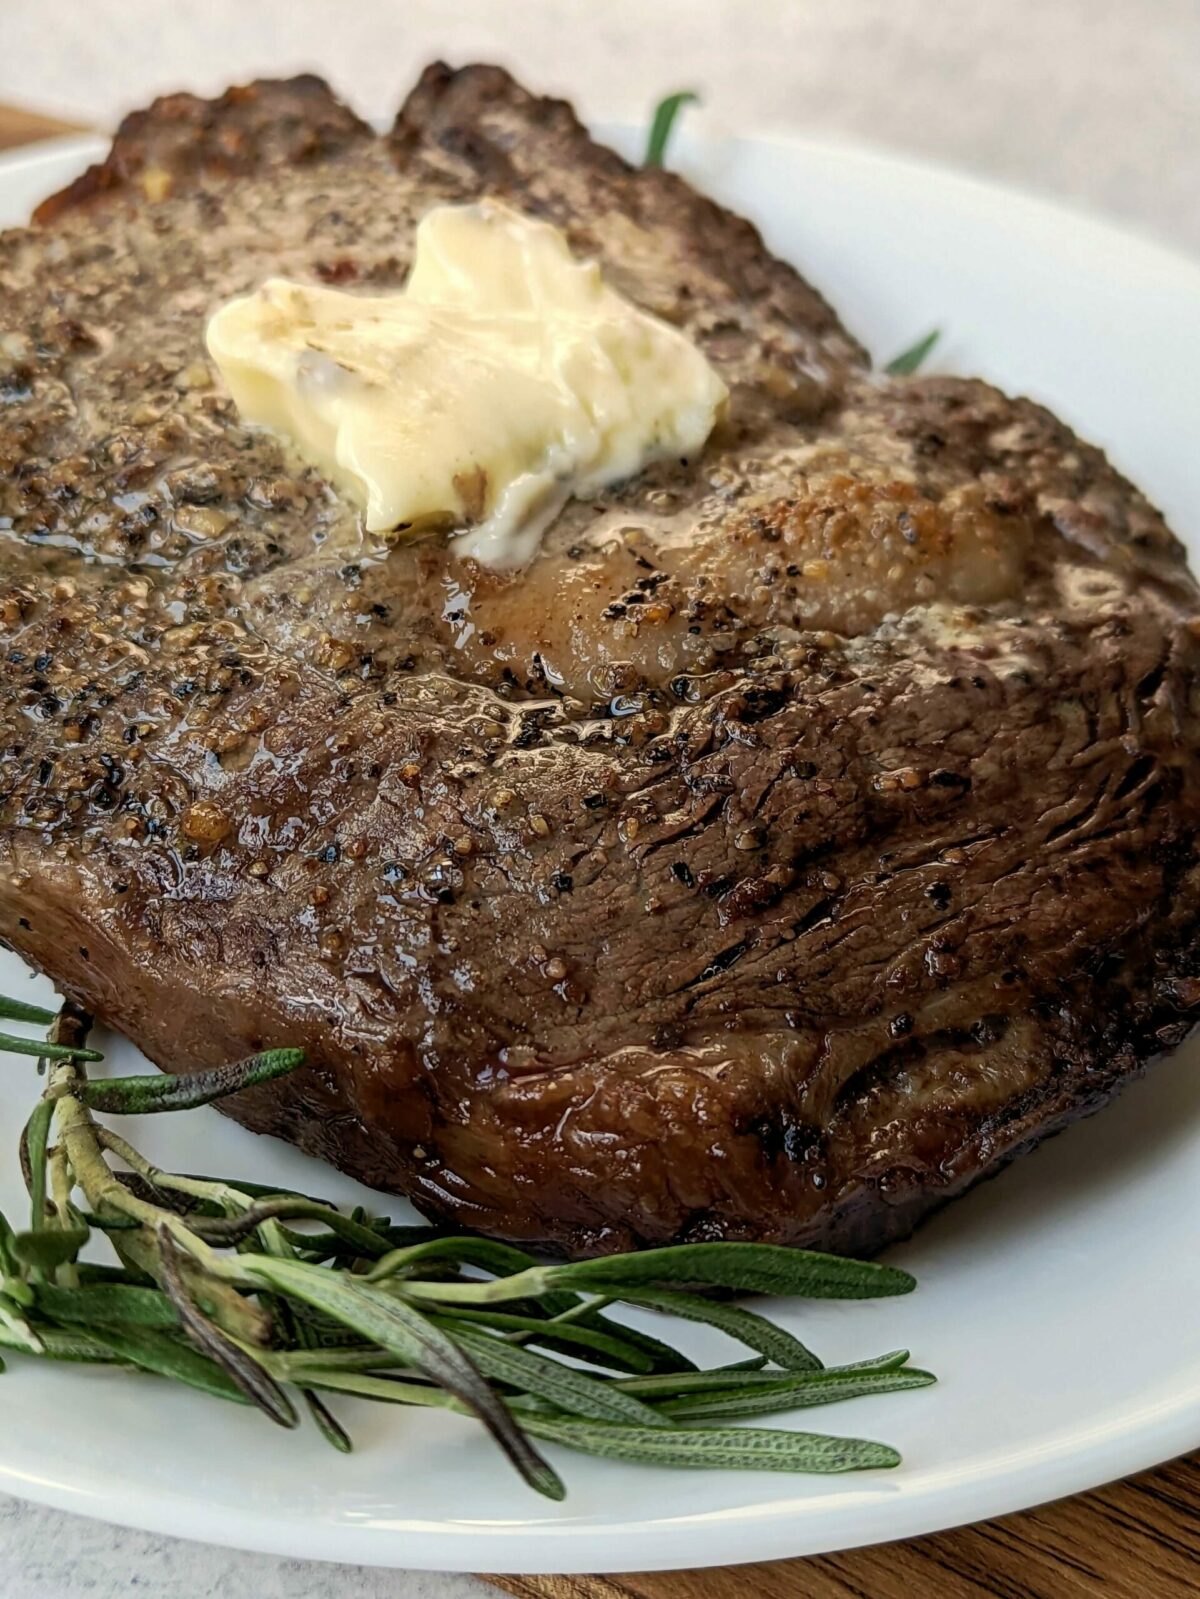 A ribeye steak topped with butter and garnished with fresh rosemary.